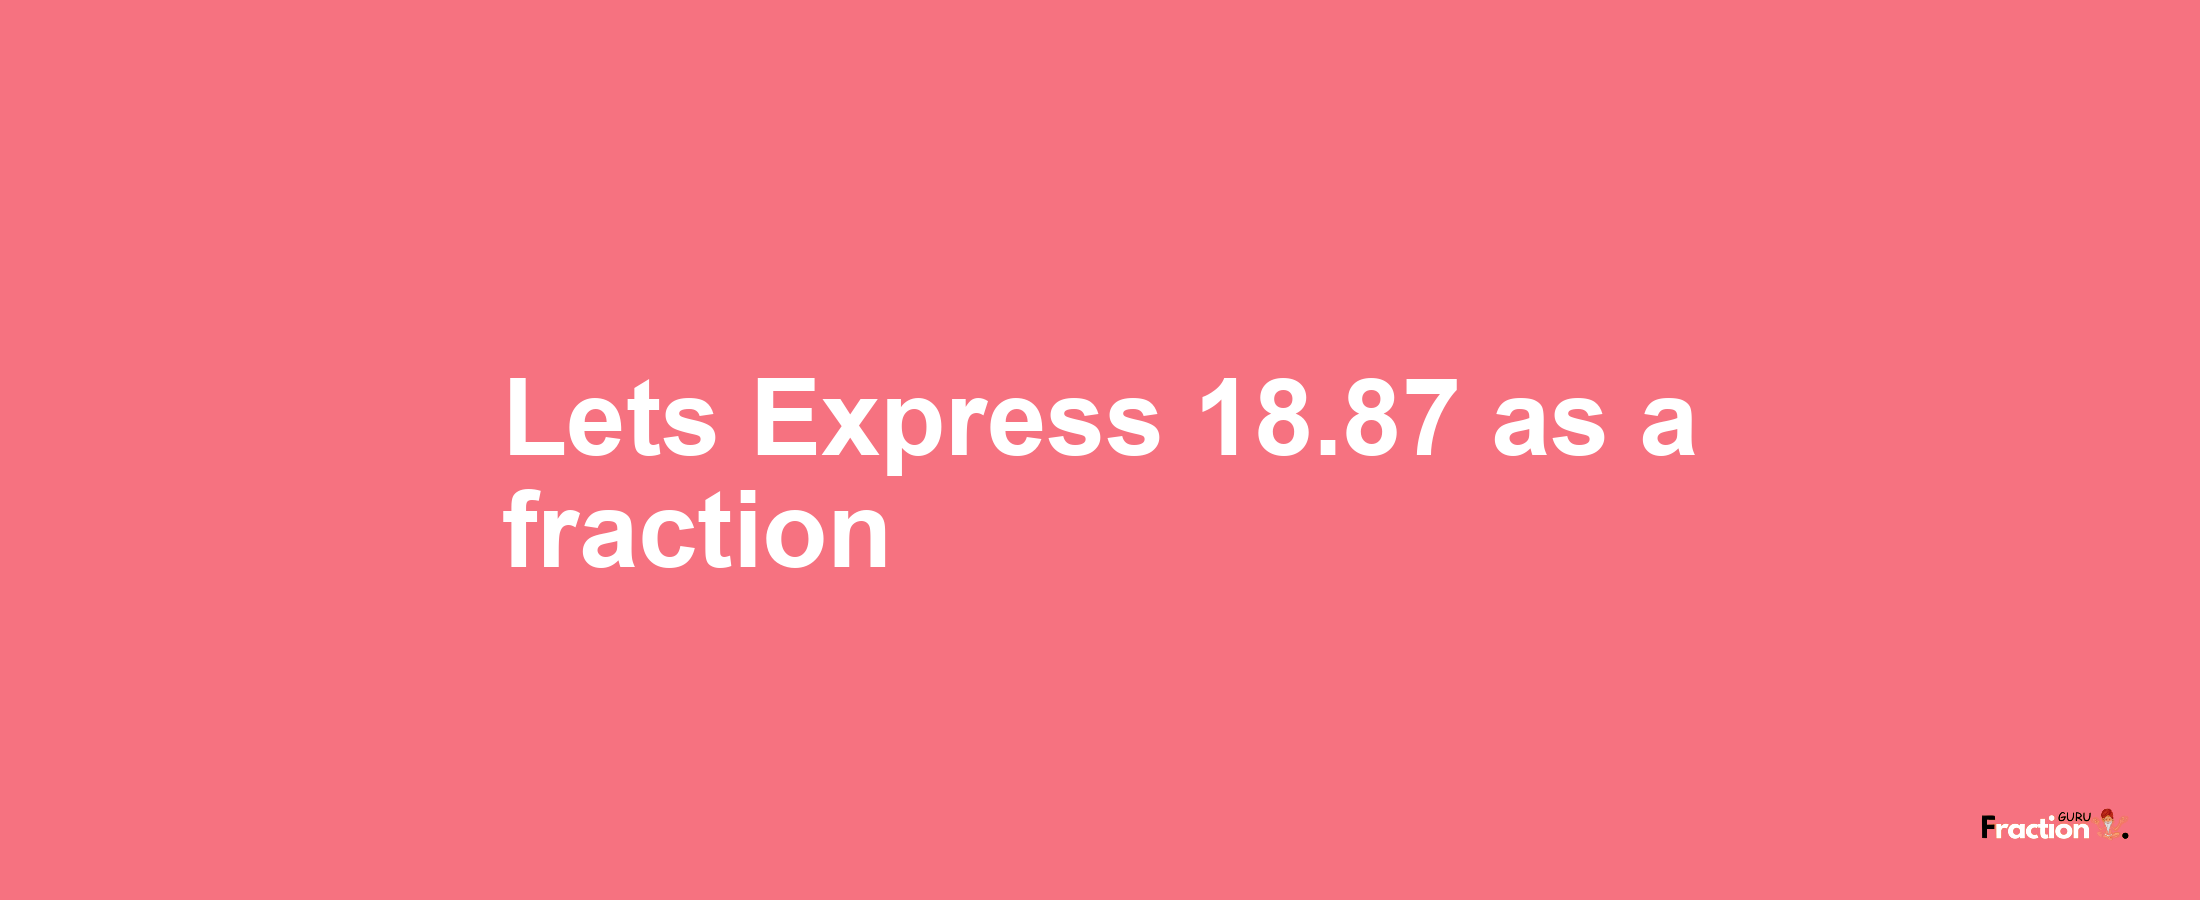 Lets Express 18.87 as afraction